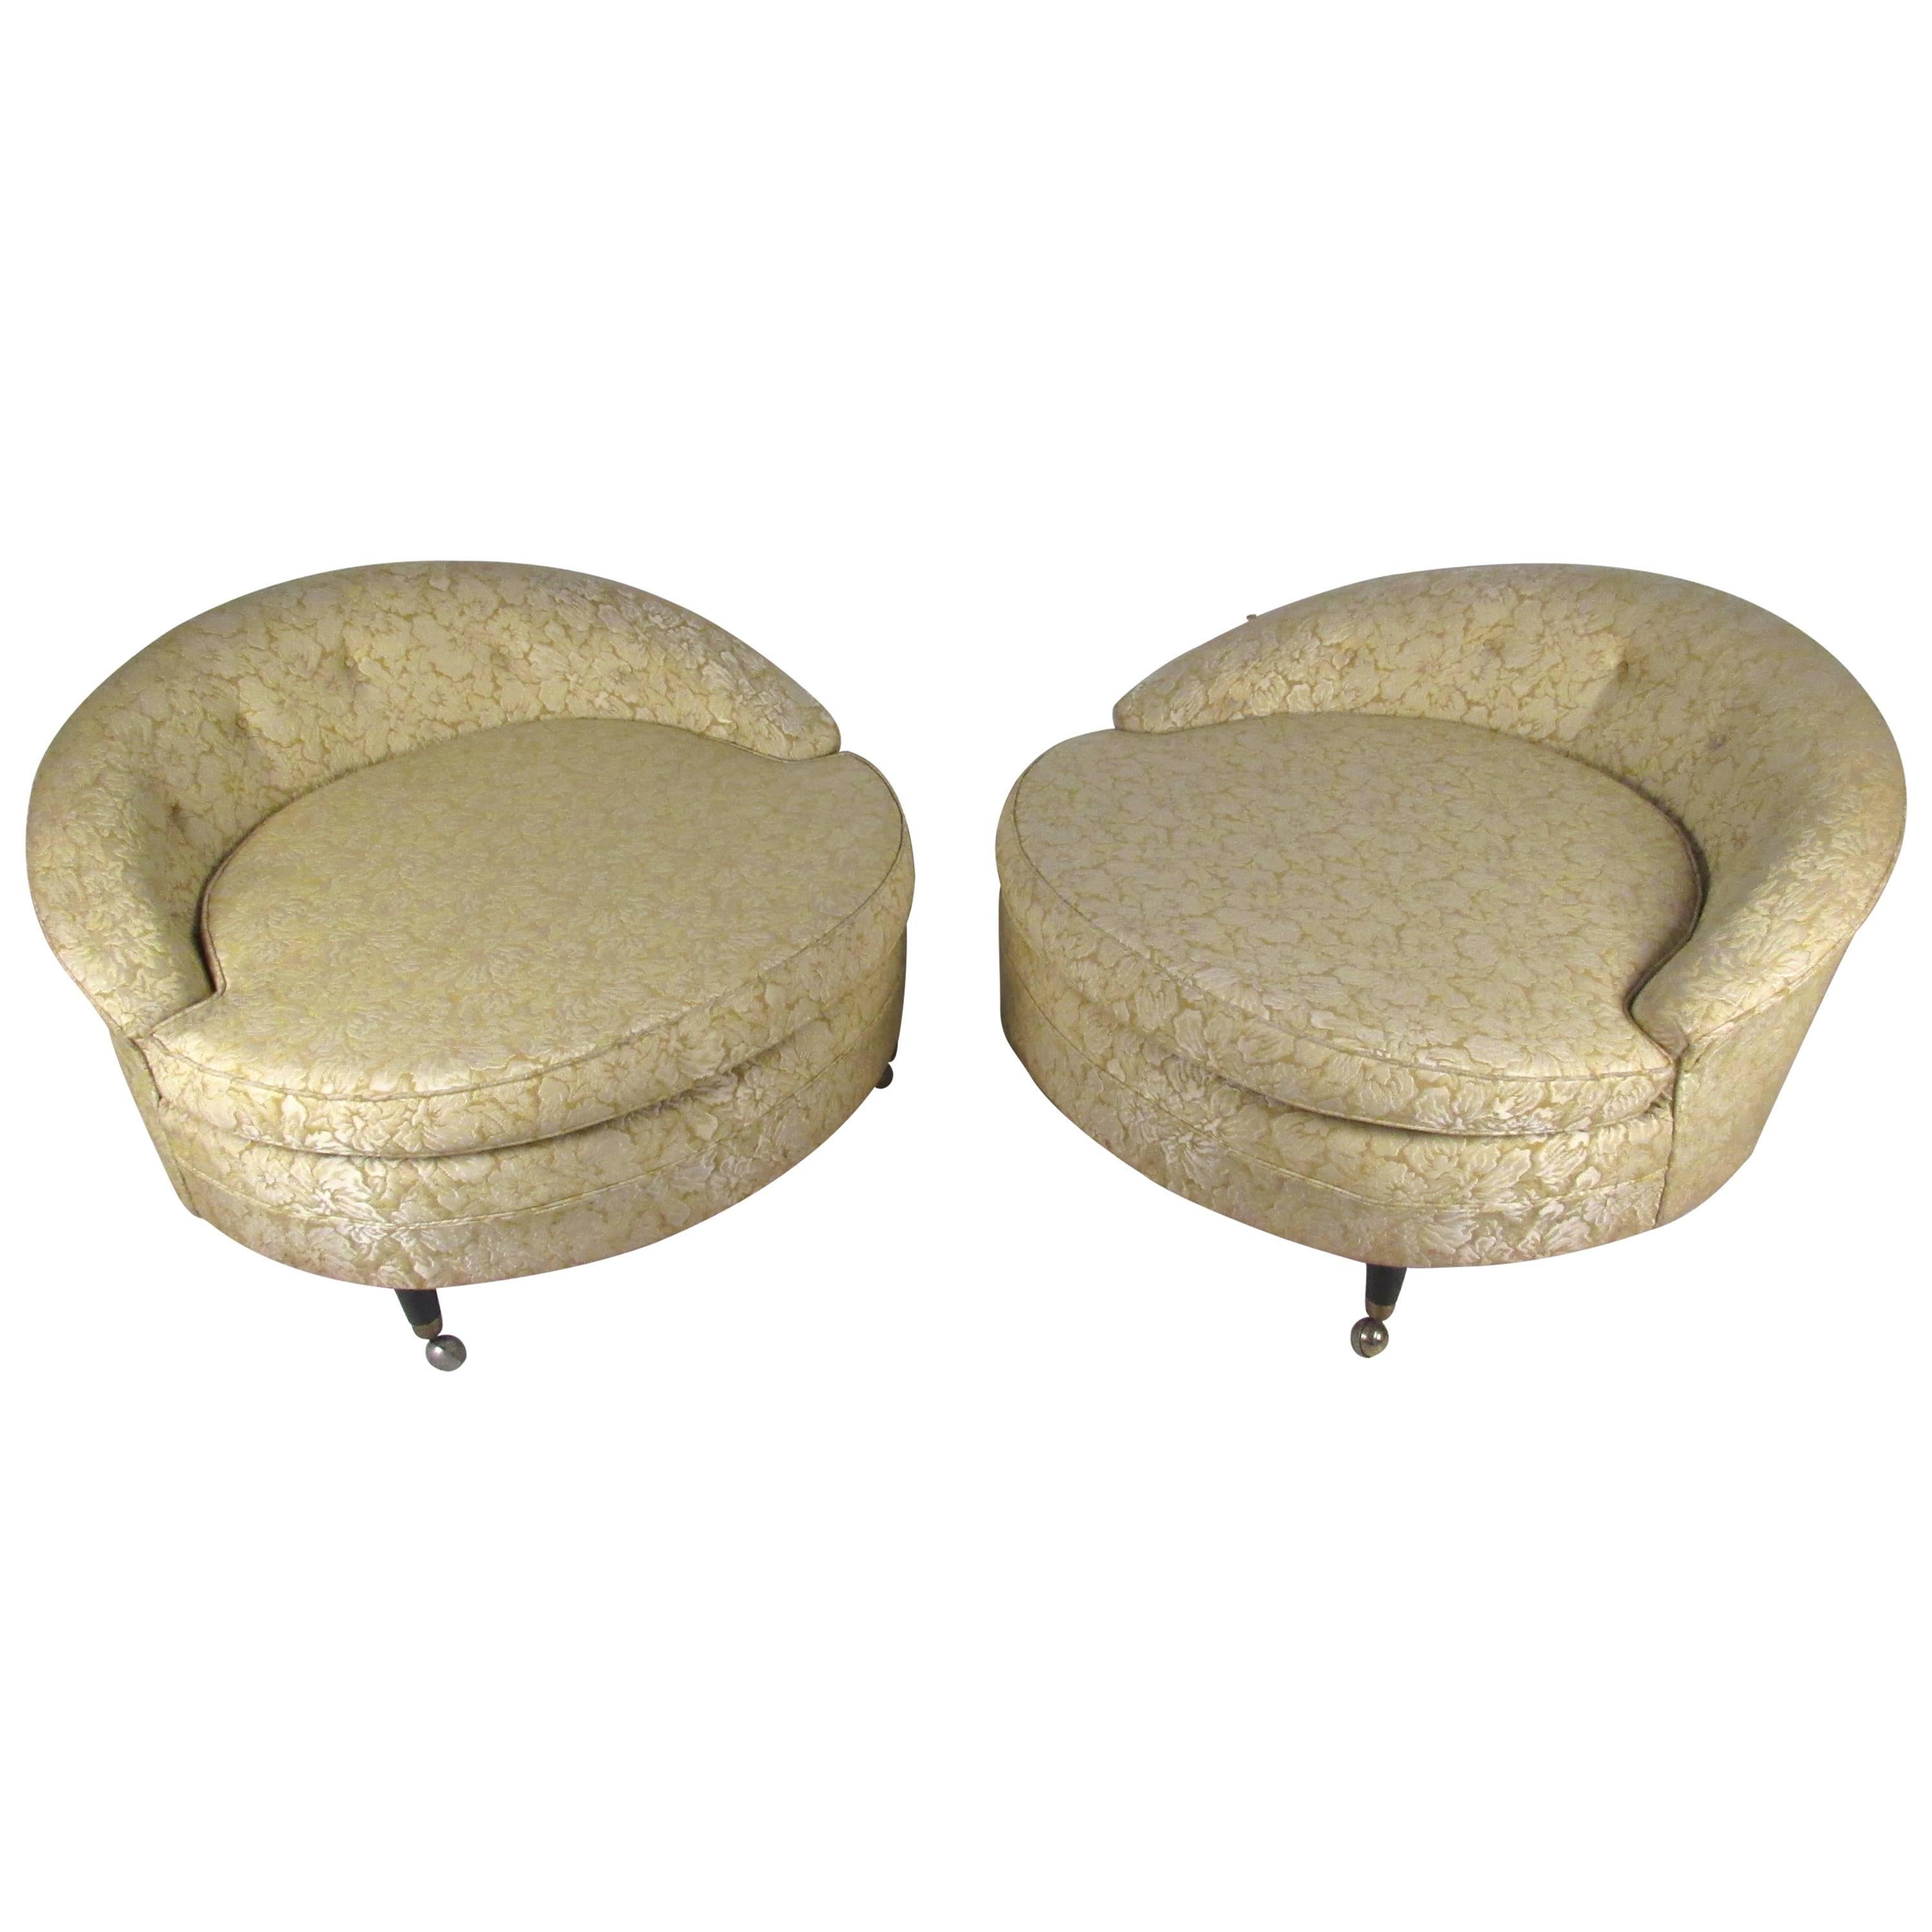 Pair of Midcentury Adrian Pearsall Style Circle Lounge Chairs For Sale